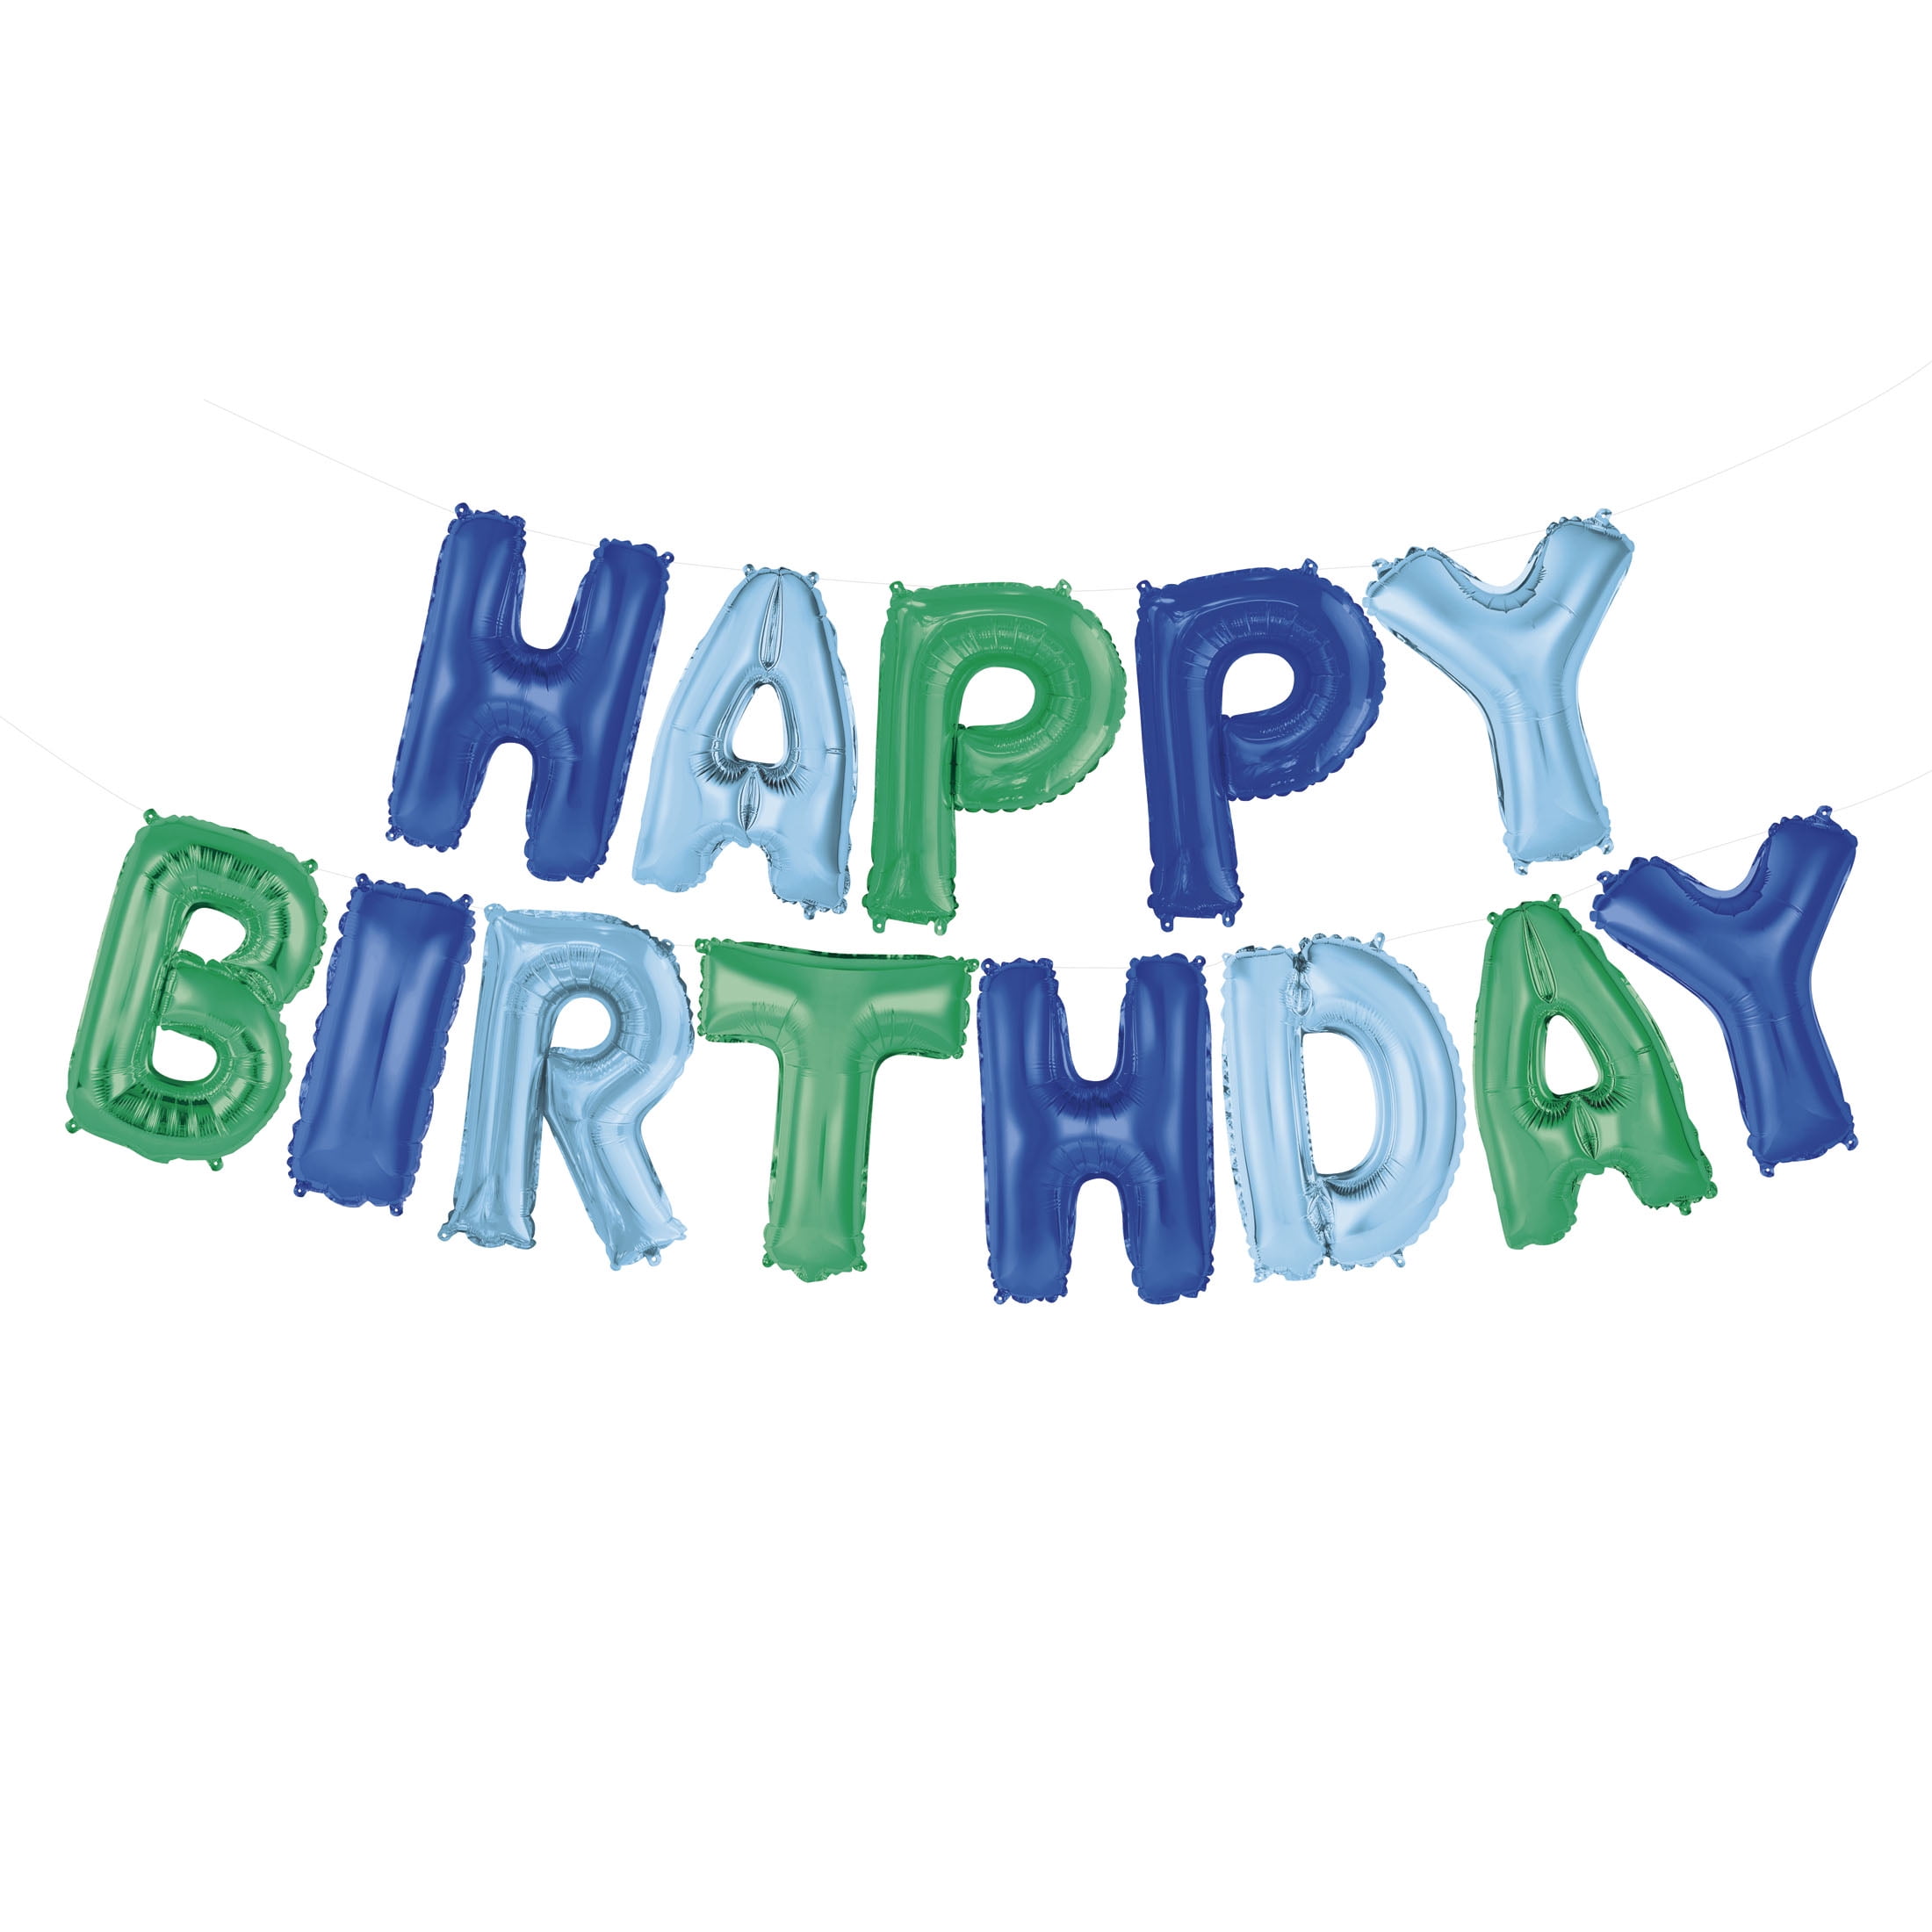 Way to Celebrate! Foil "Happy Birthday" Letter Balloon Banner Kit, Blue & Green